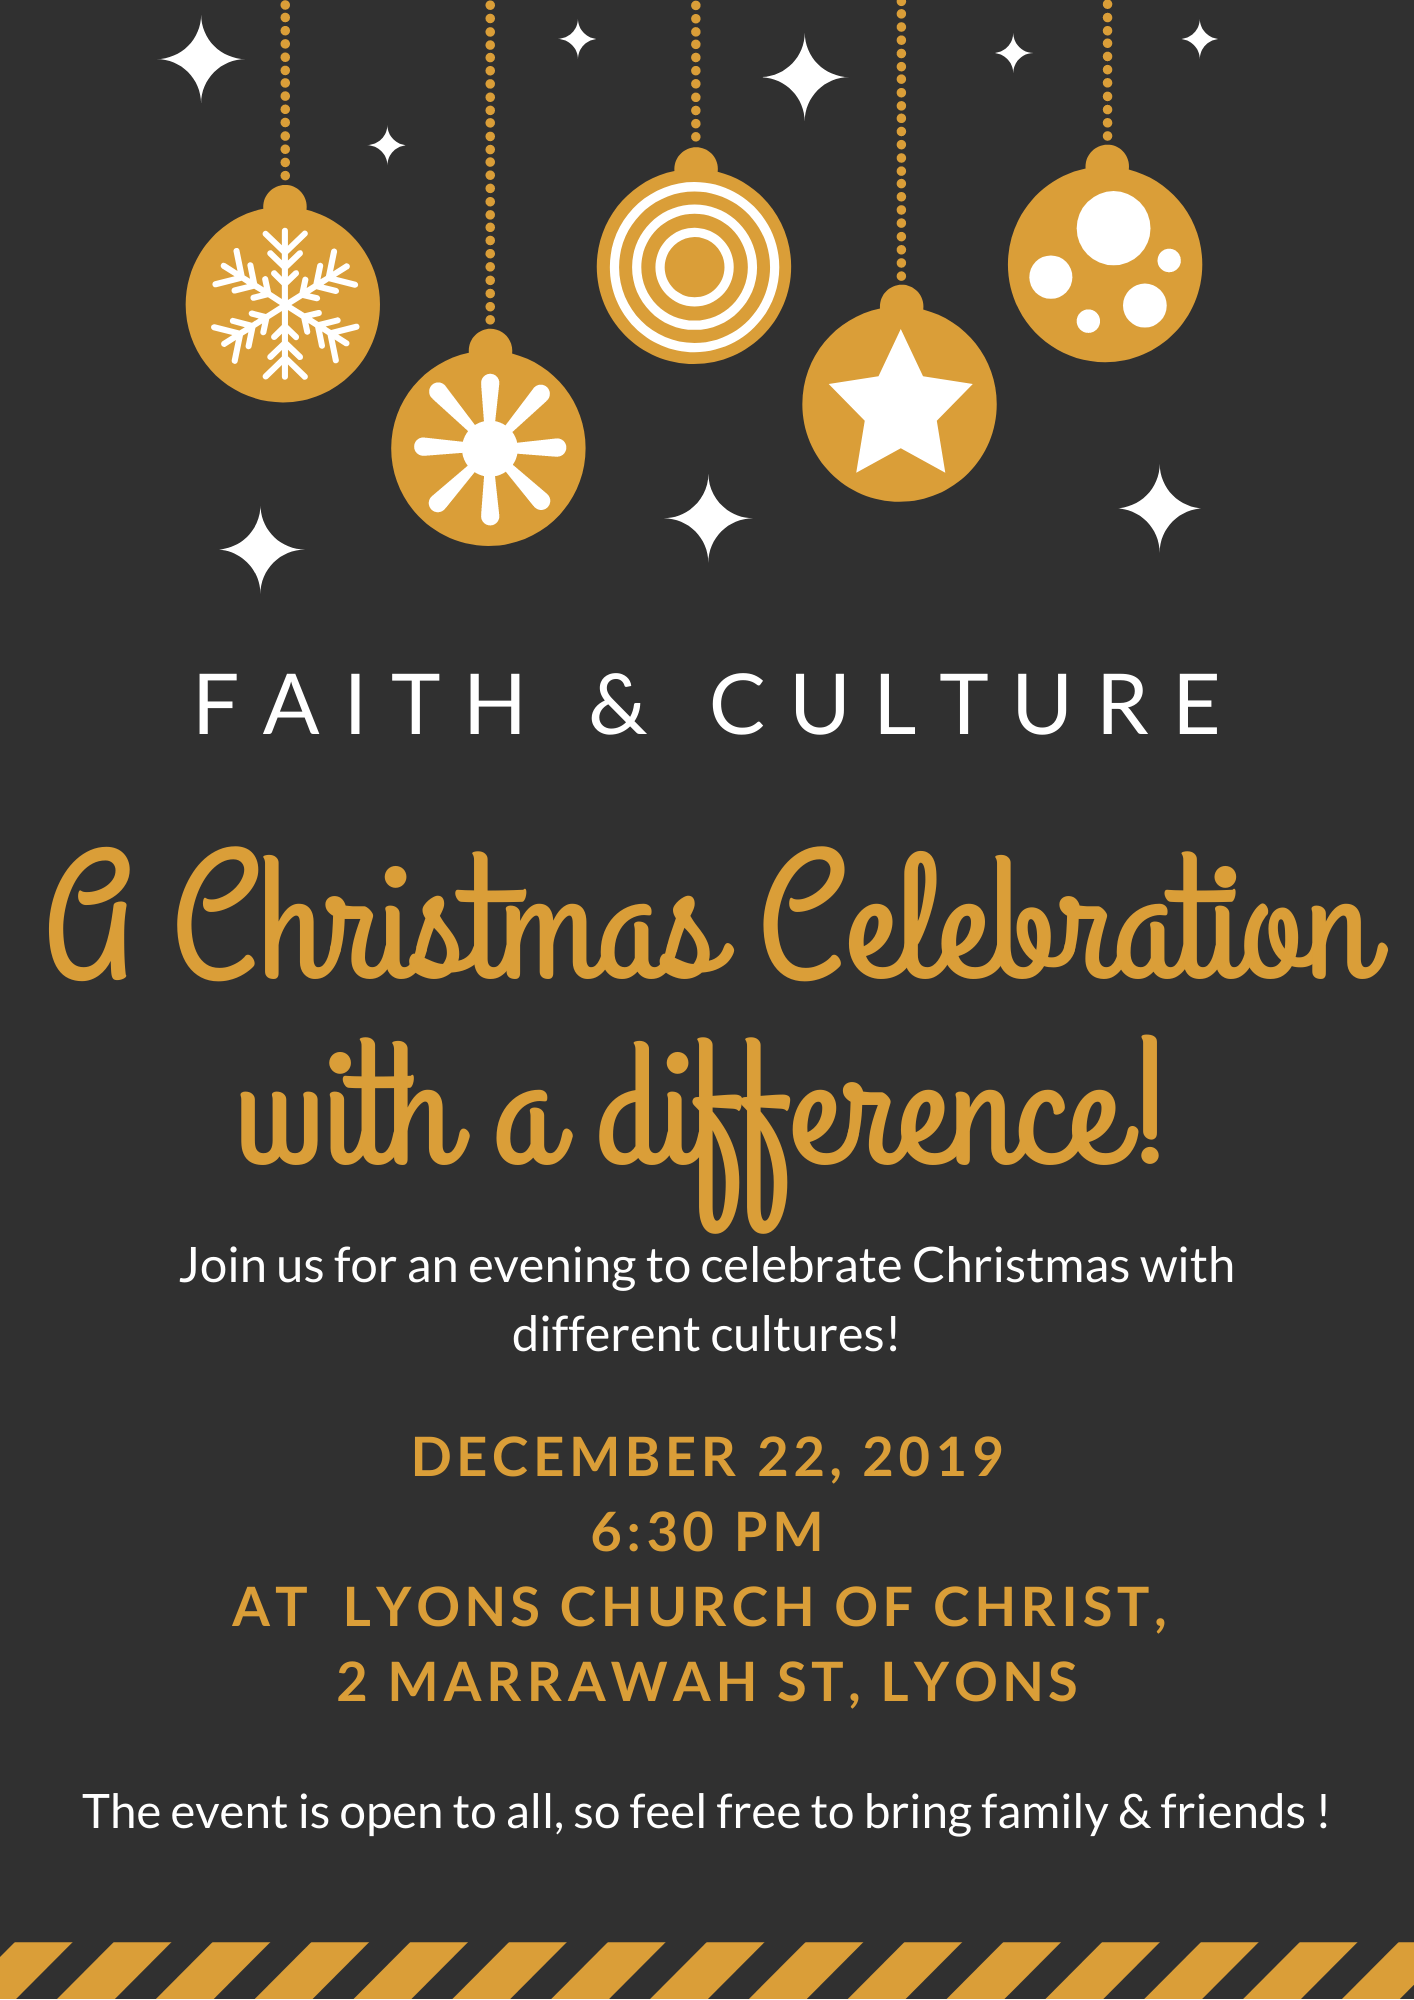 Faith & Culture - A Christmas celebration with a difference!